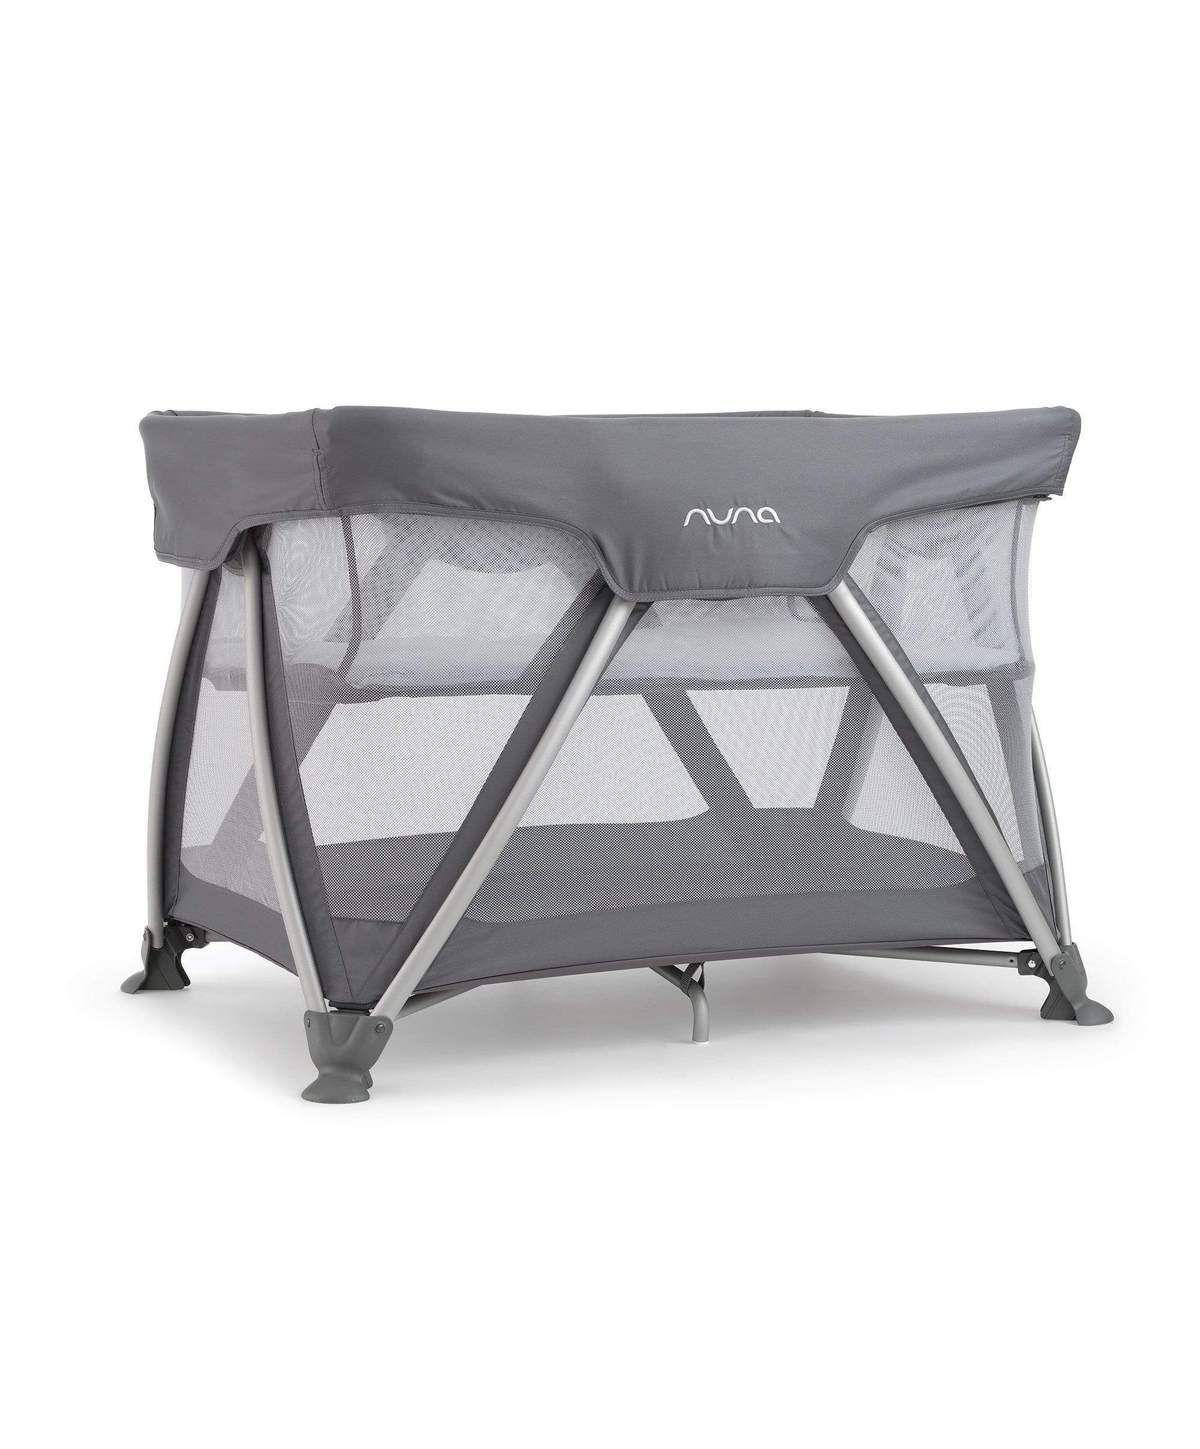 <p><strong>£170.00</strong></p><p><a href="https://www.mamasandpapas.com/products/nuna-sena-travel-cot-graphite-173347700">Shop Now</a></p><p>At 14.95kg this travel cot from Dutch baby brand Nuna is at the heavier end of the portable scale. But our panel of mum testers were impressed with the handy centralised pulley system that can be assembled in seconds with no tools required, plus it’s raised off the ground to increase airflow and keep your baby cool throughout the night. It also folds up small enough to store away easily in a cupboard and most importantly, the padded mattress was cosy enough to get the little one's vote. </p><p>Pop this cute <a href="https://www.mamasandpapas.com/products/snuz-cloud-baby-sleep-aid-282846800">Baby Snuz Cloud</a> in your shopping trolley too and boost everyone's chances of a good night's sleep.</p><p><strong>Dimensions</strong>: 74.5cm x 107cm x 73.5cm</p><p><strong>Folded size</strong>: 85.5cm x 36.5cm x 34 cm</p><p><strong>Weight</strong>: 14.95kg</p>